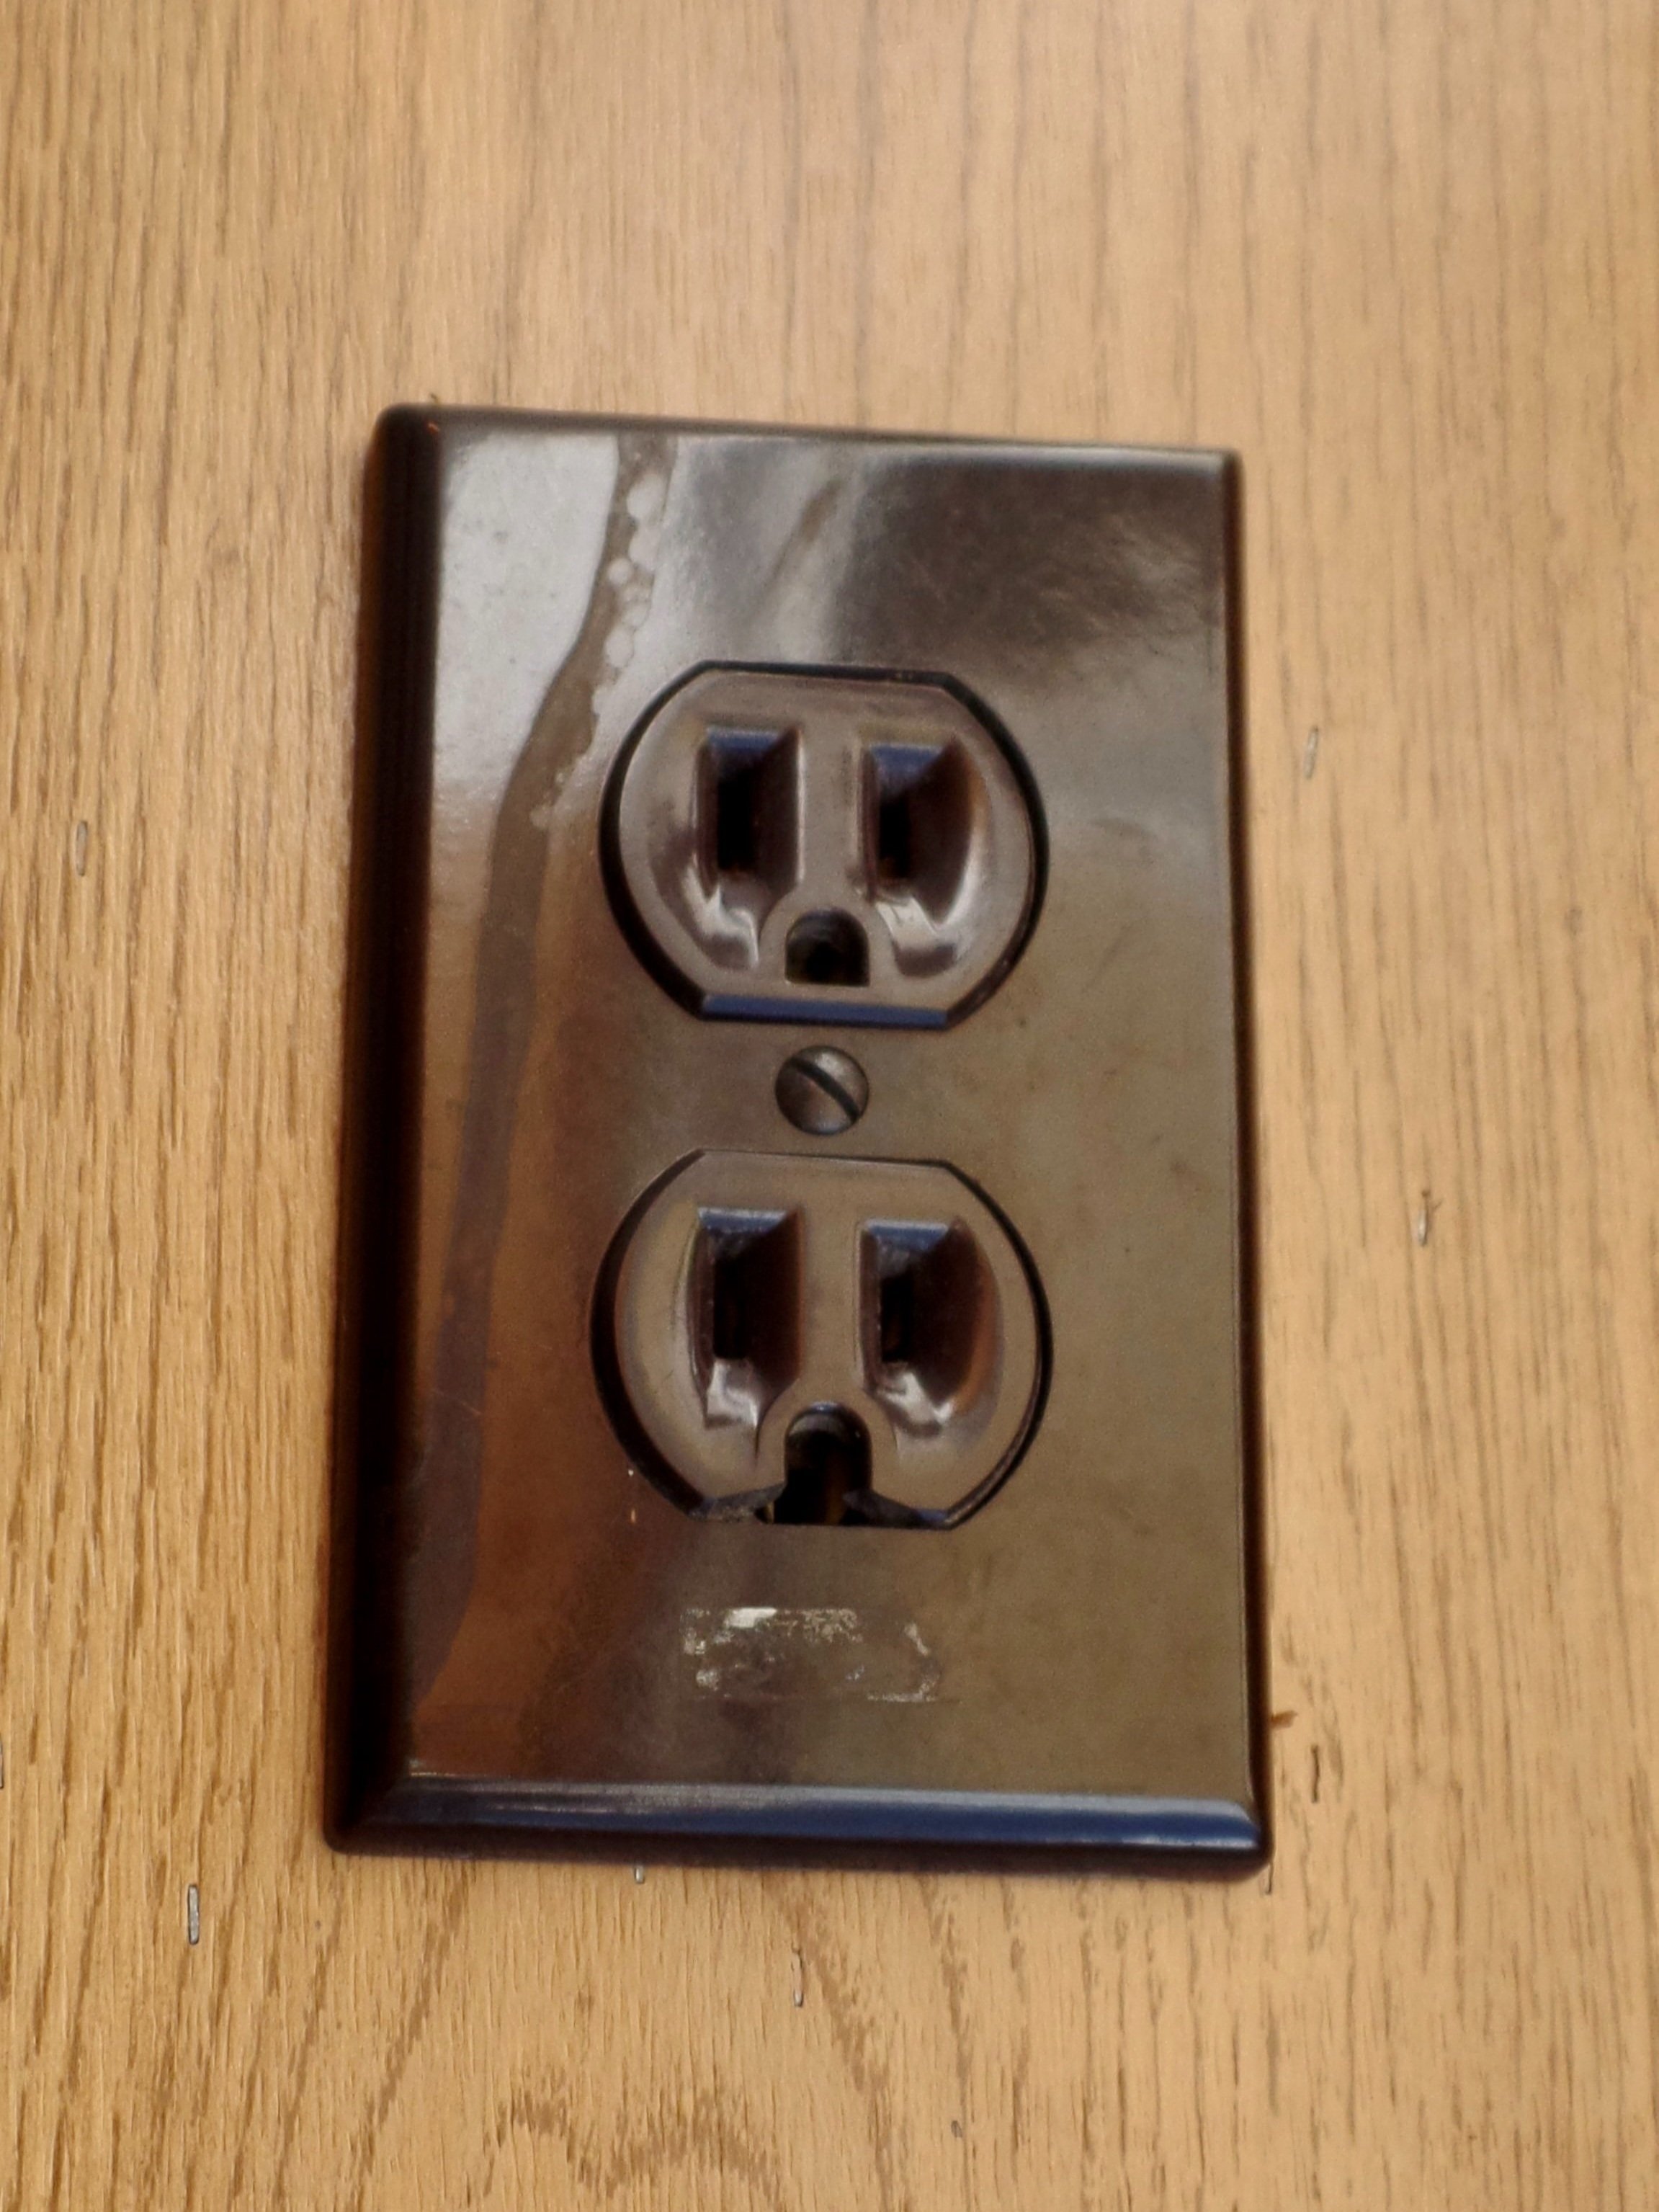 DIY RV Renovation: How We Installed a Nightlight Electrical Outlet